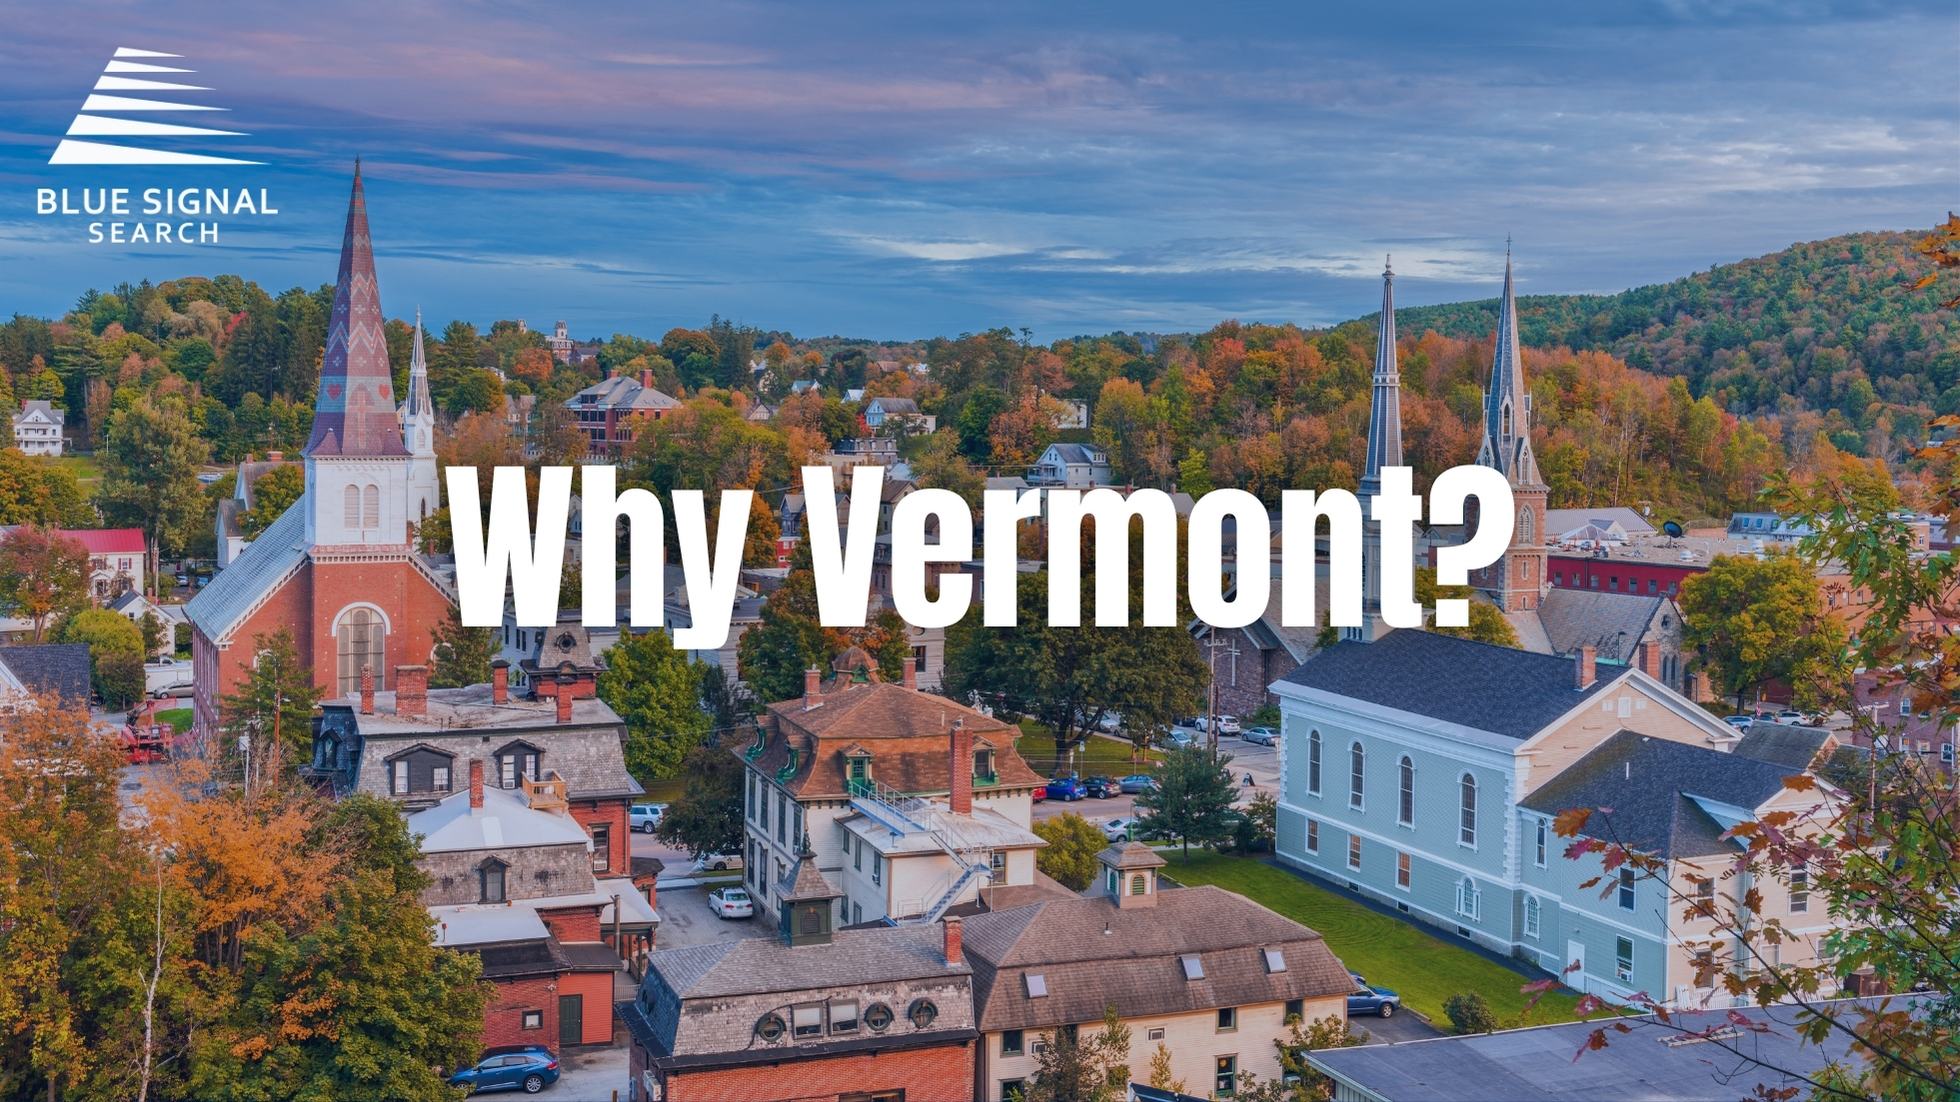 Scenic view of Vermont's landscape with colorful autumn trees, historic buildings, and church steeples under a soft blue sky.